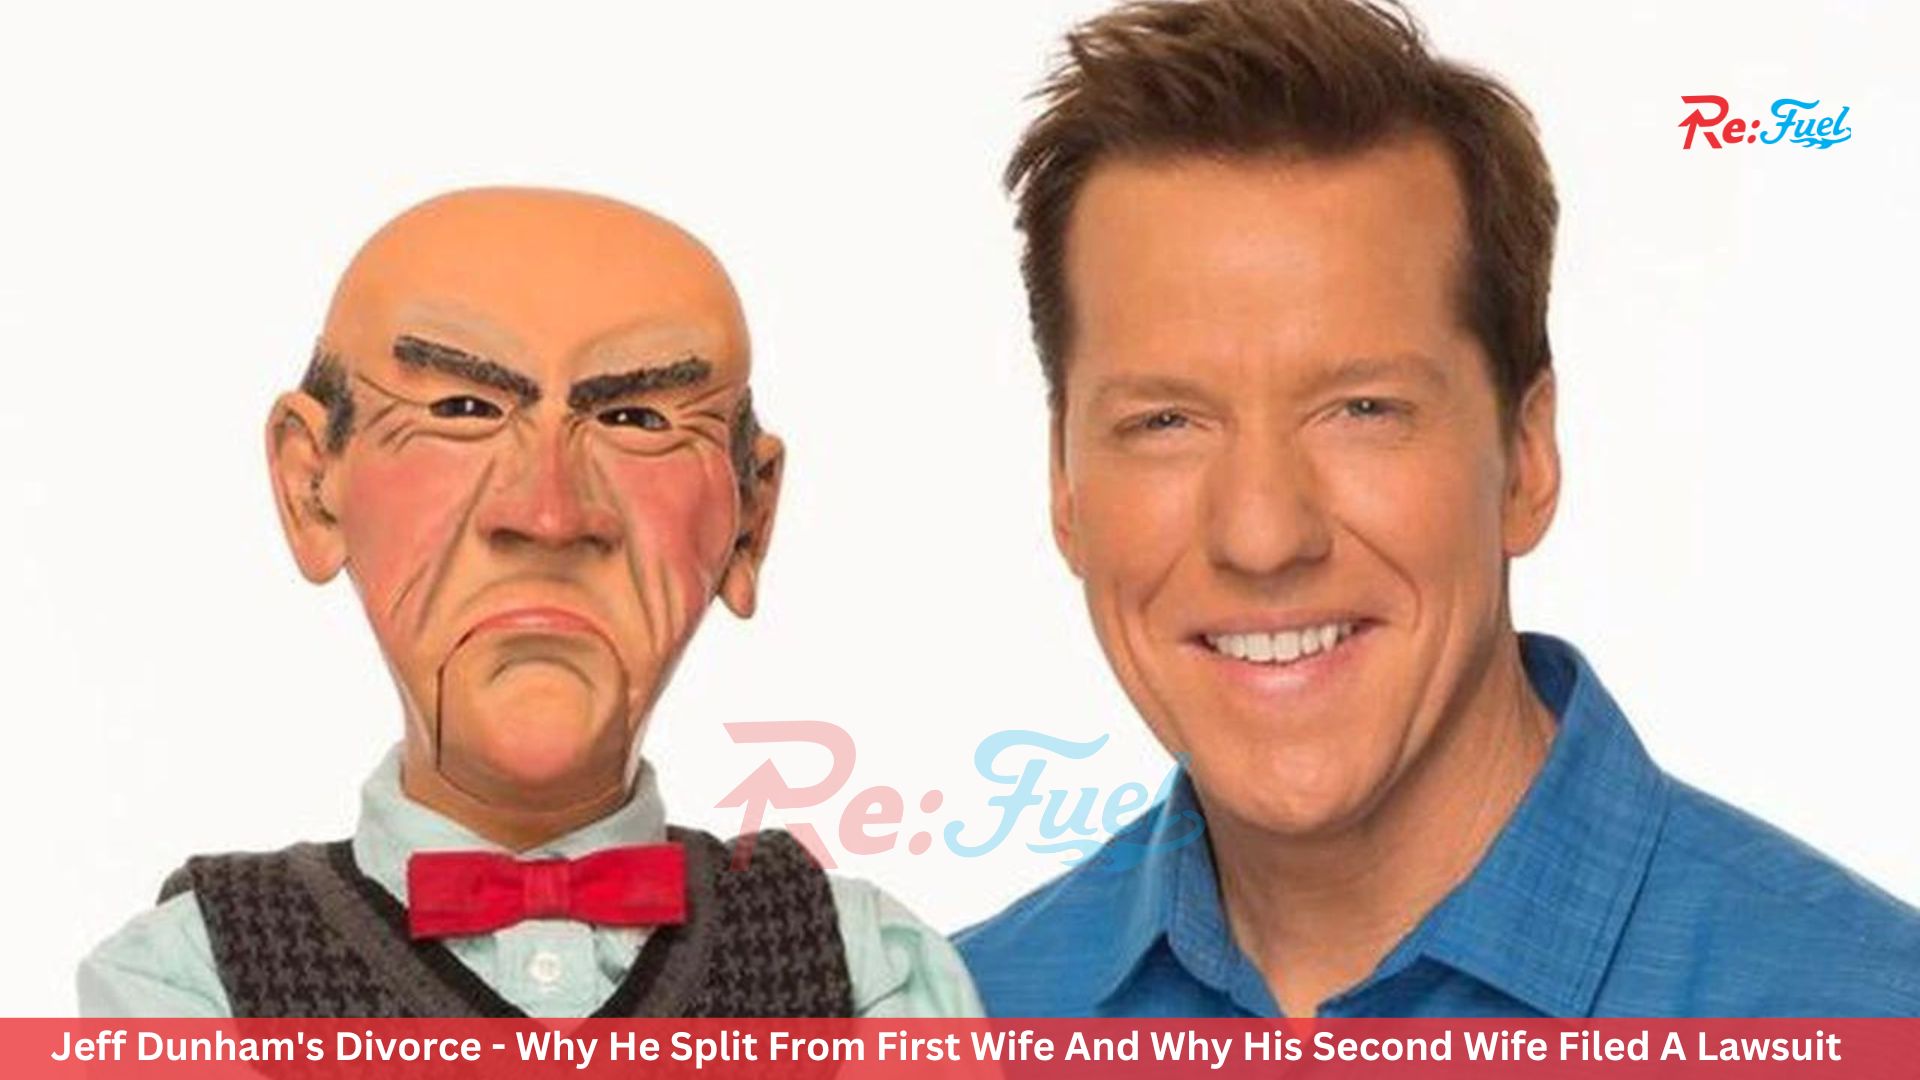 Jeff Dunham's Divorce - Why He Split From First Wife And Why His Second Wife Filed A Lawsuit